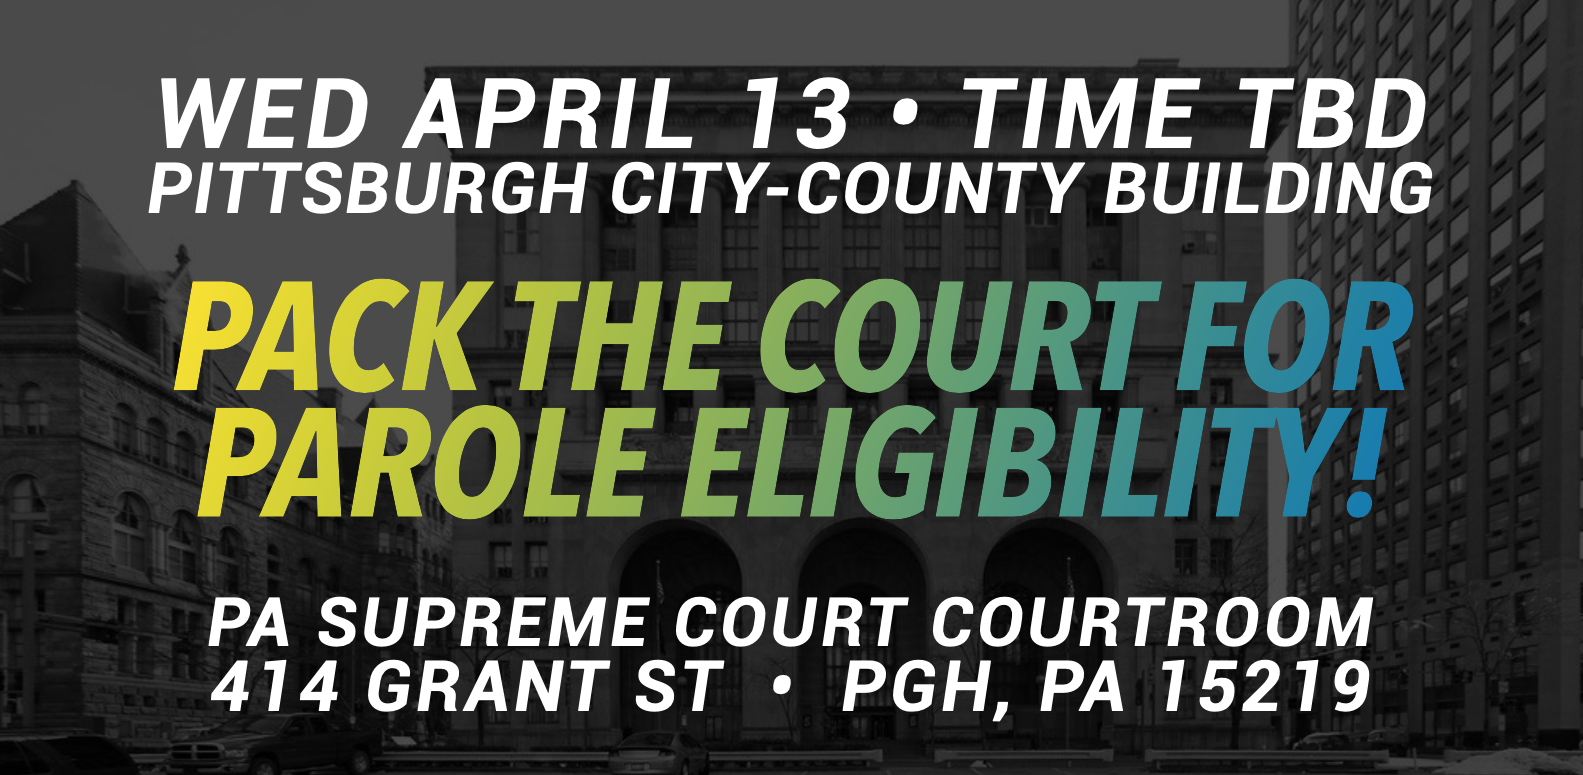 On a background of a black and white photo of what appears to be a facade of a court building. In white text reads “WED APRIL 13 - TIME TBD PITTSBURGH CITY-COUNTY BUILDING.” Below in a gradient yellow-green-blue text reads “Pack the Court for Parole Eligibility!” below in white text reads “PA Supreme Court Courtroom 414 Grant St - PGH, PA 15219”